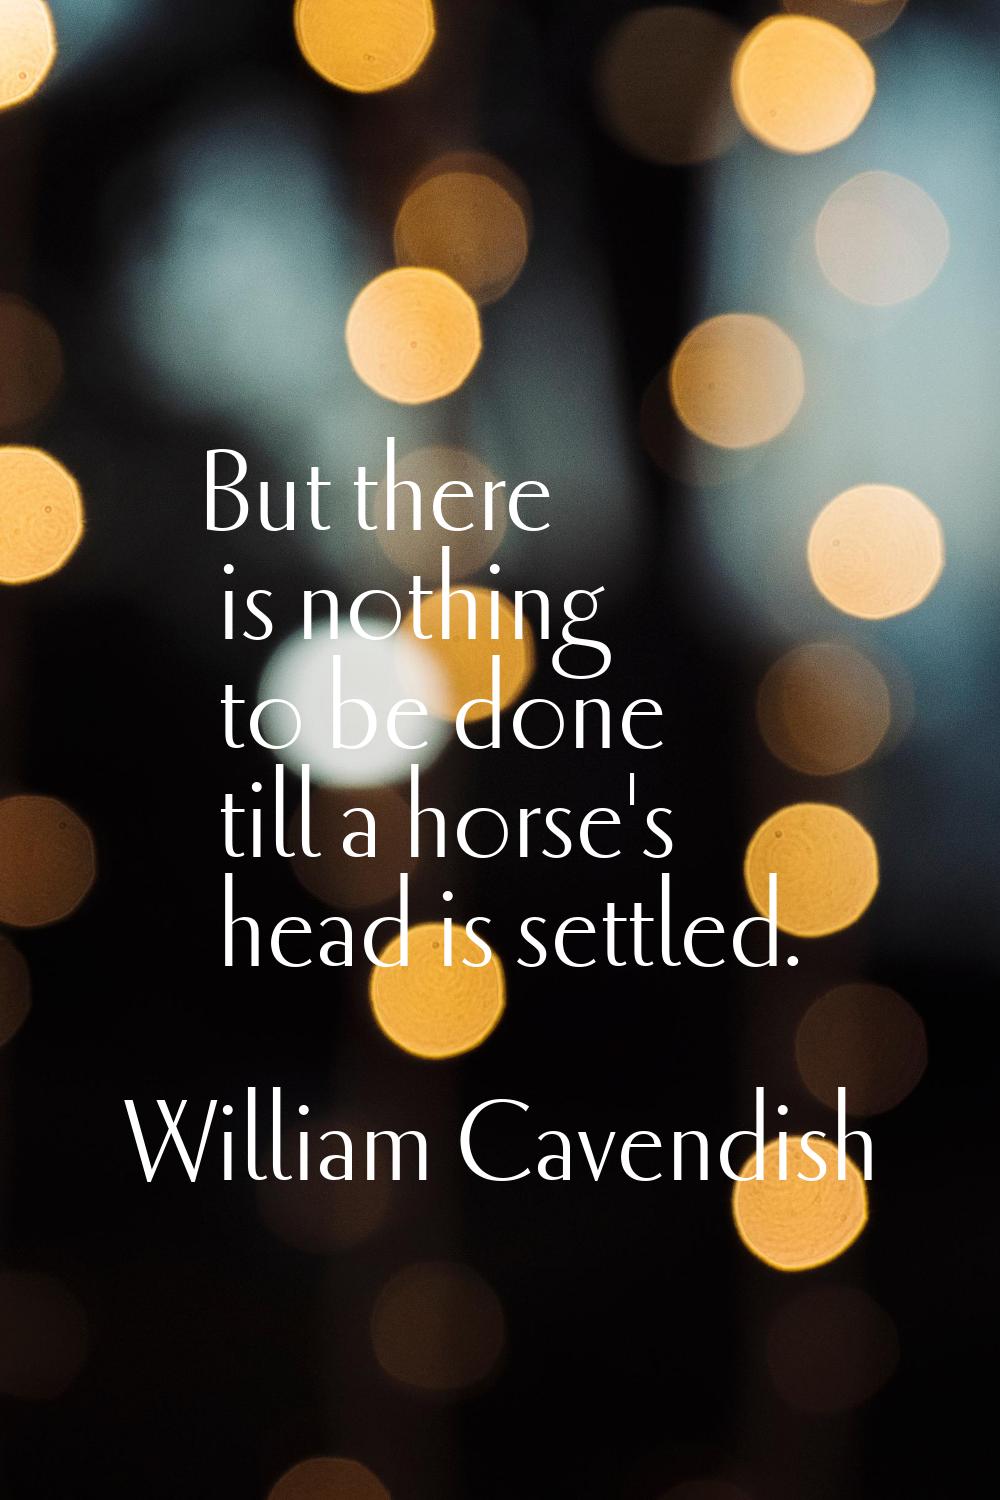 But there is nothing to be done till a horse's head is settled.